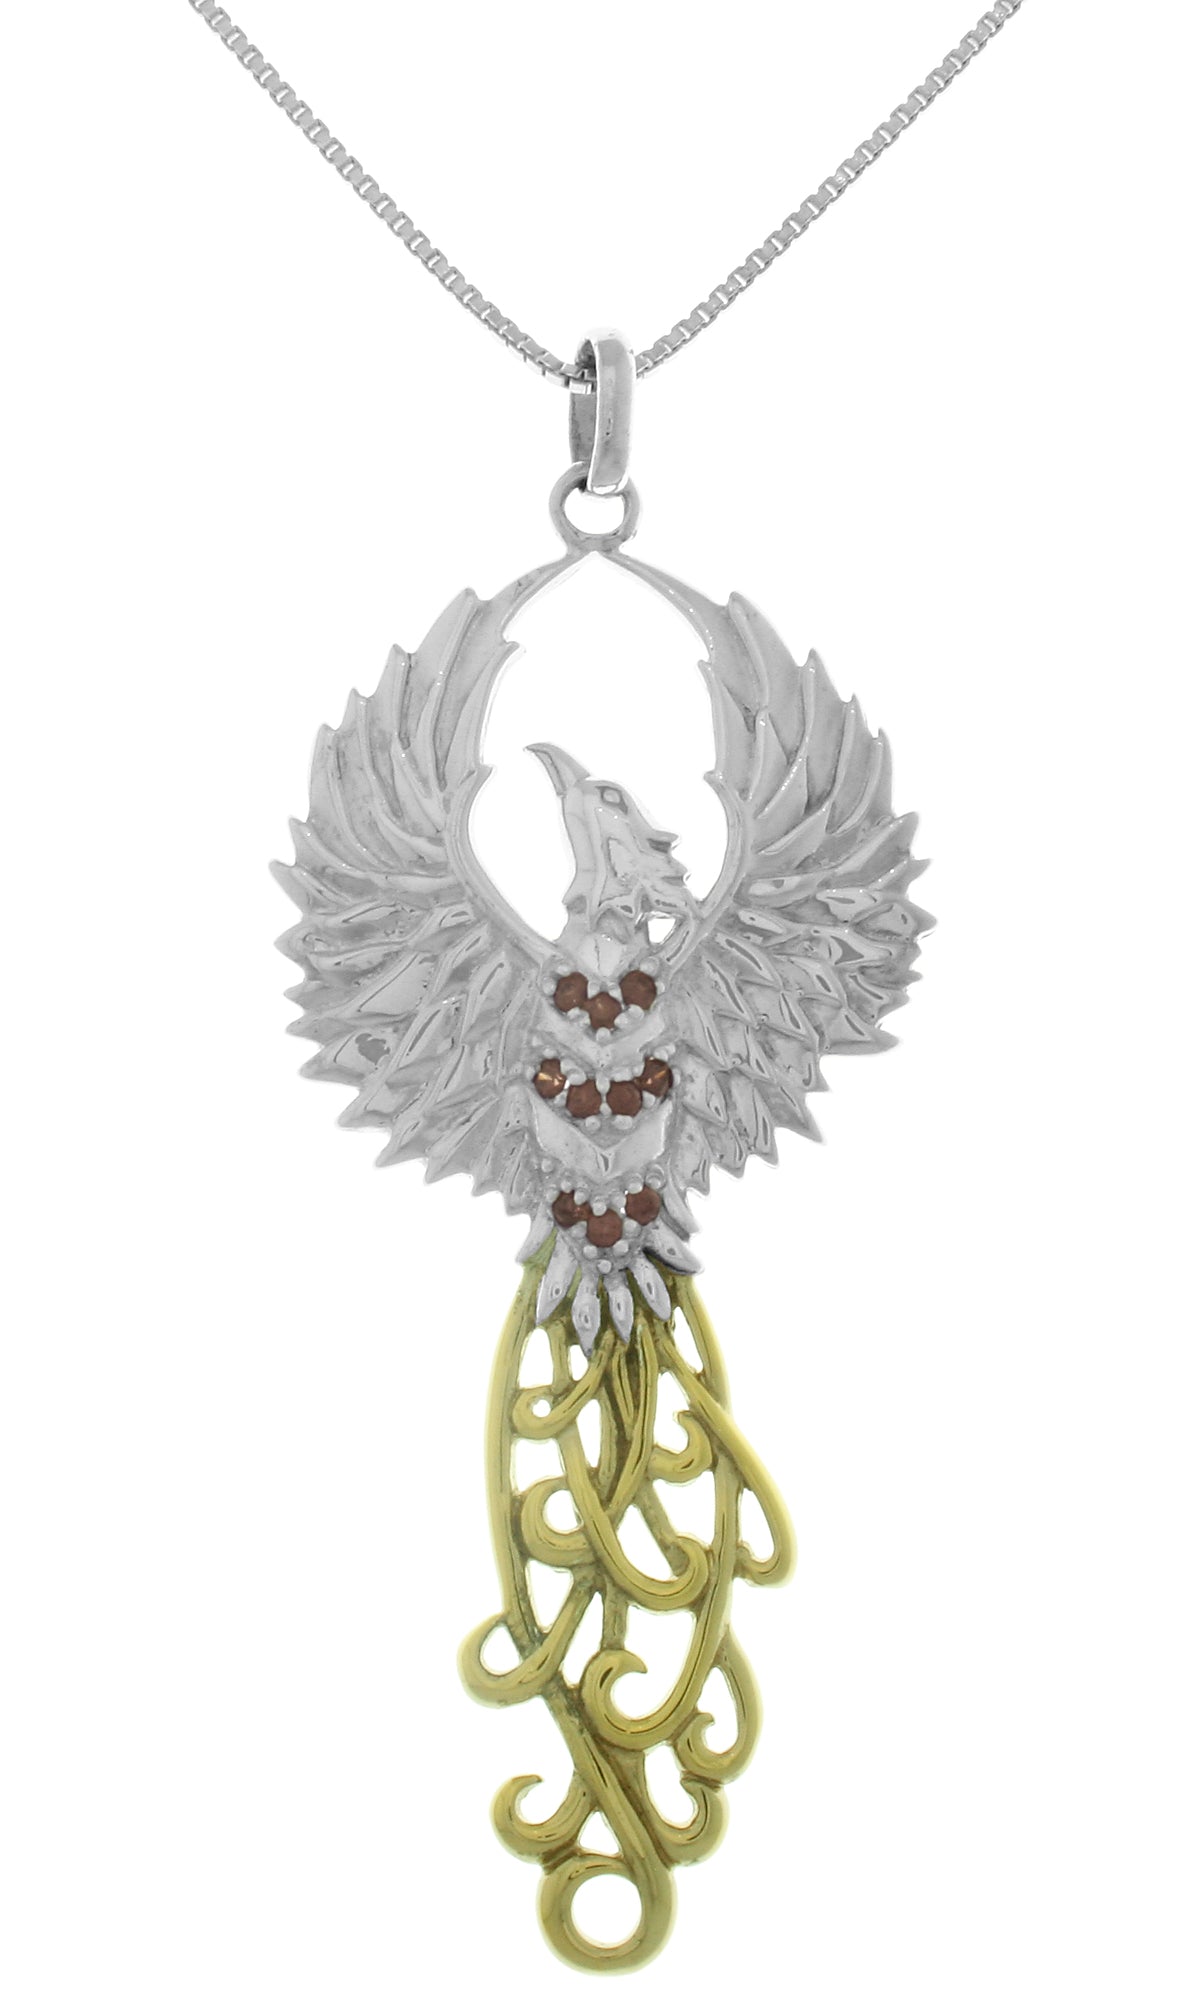 Jewelry Trends Rising Phoenix Fire Bird Sterling Silver and 18k Gold-Plated Pendant Necklace 18"